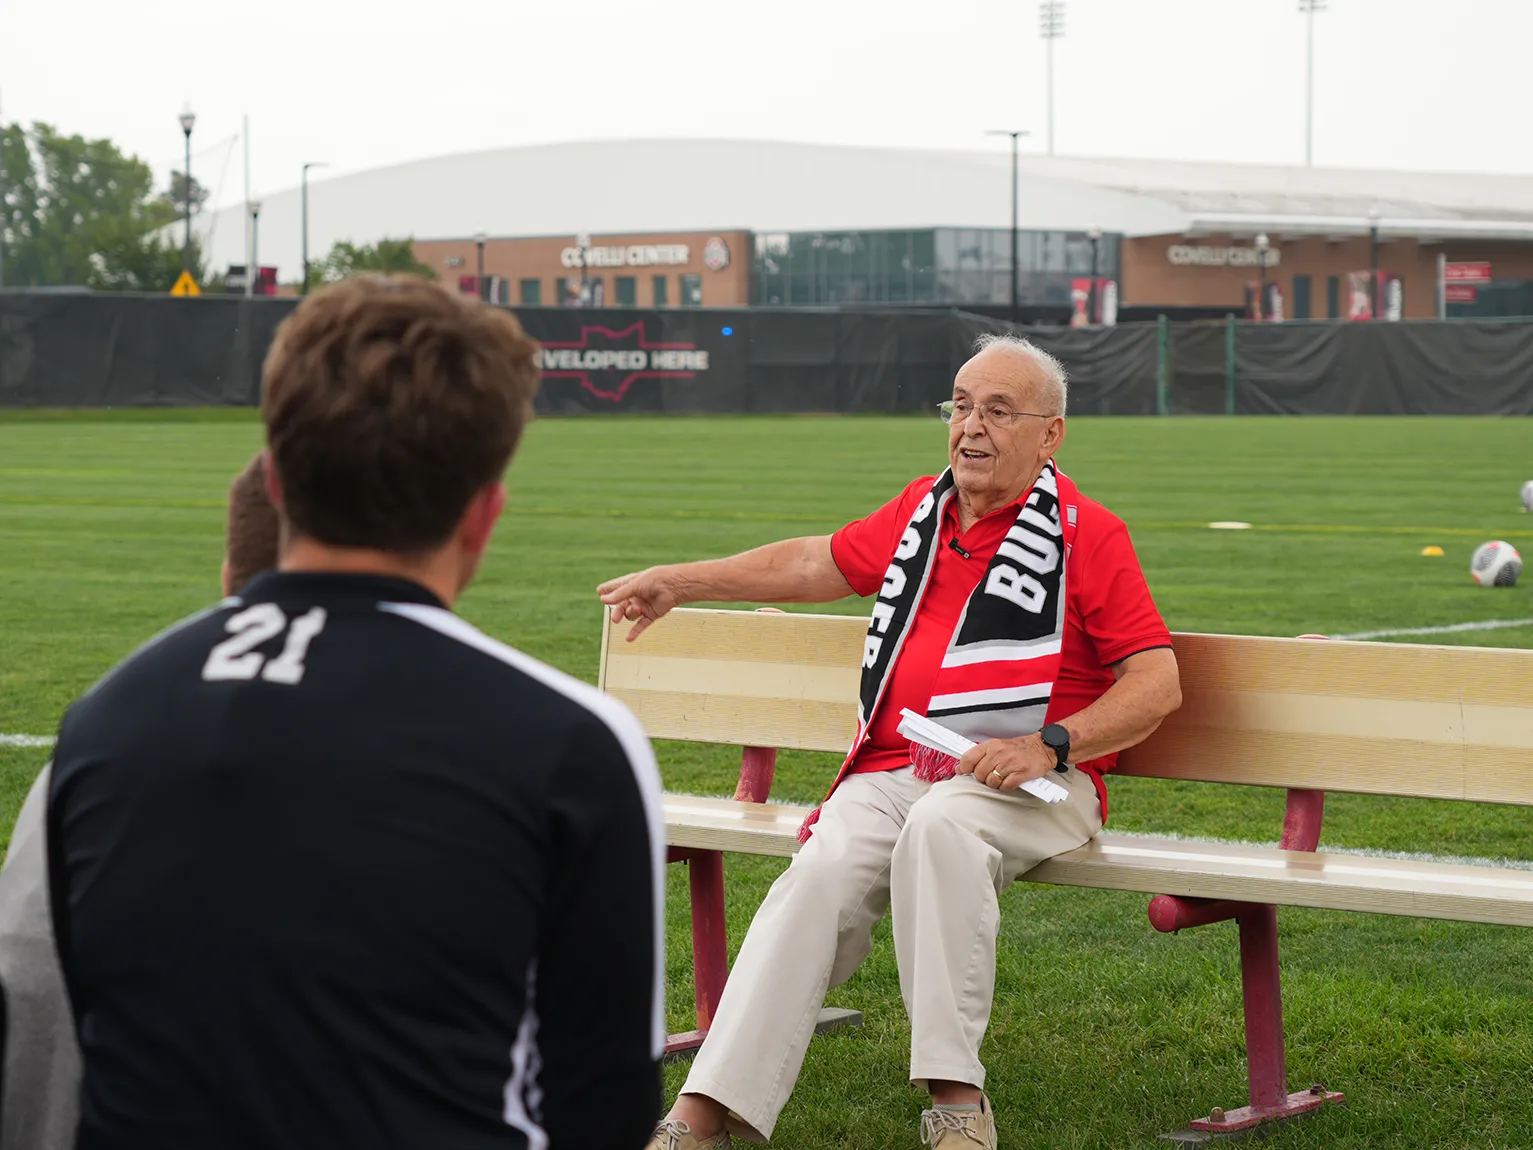 An older man happily chats, while wearing a scarlet shirt and long Buckeyes scarf, lounging on a bench along a soccer field at the Schumaker Complex. Behind him, the grass looks vibrant and soccer balls and field markings can be seen. Facing him are members of the men’s soccer team listening as he talks.